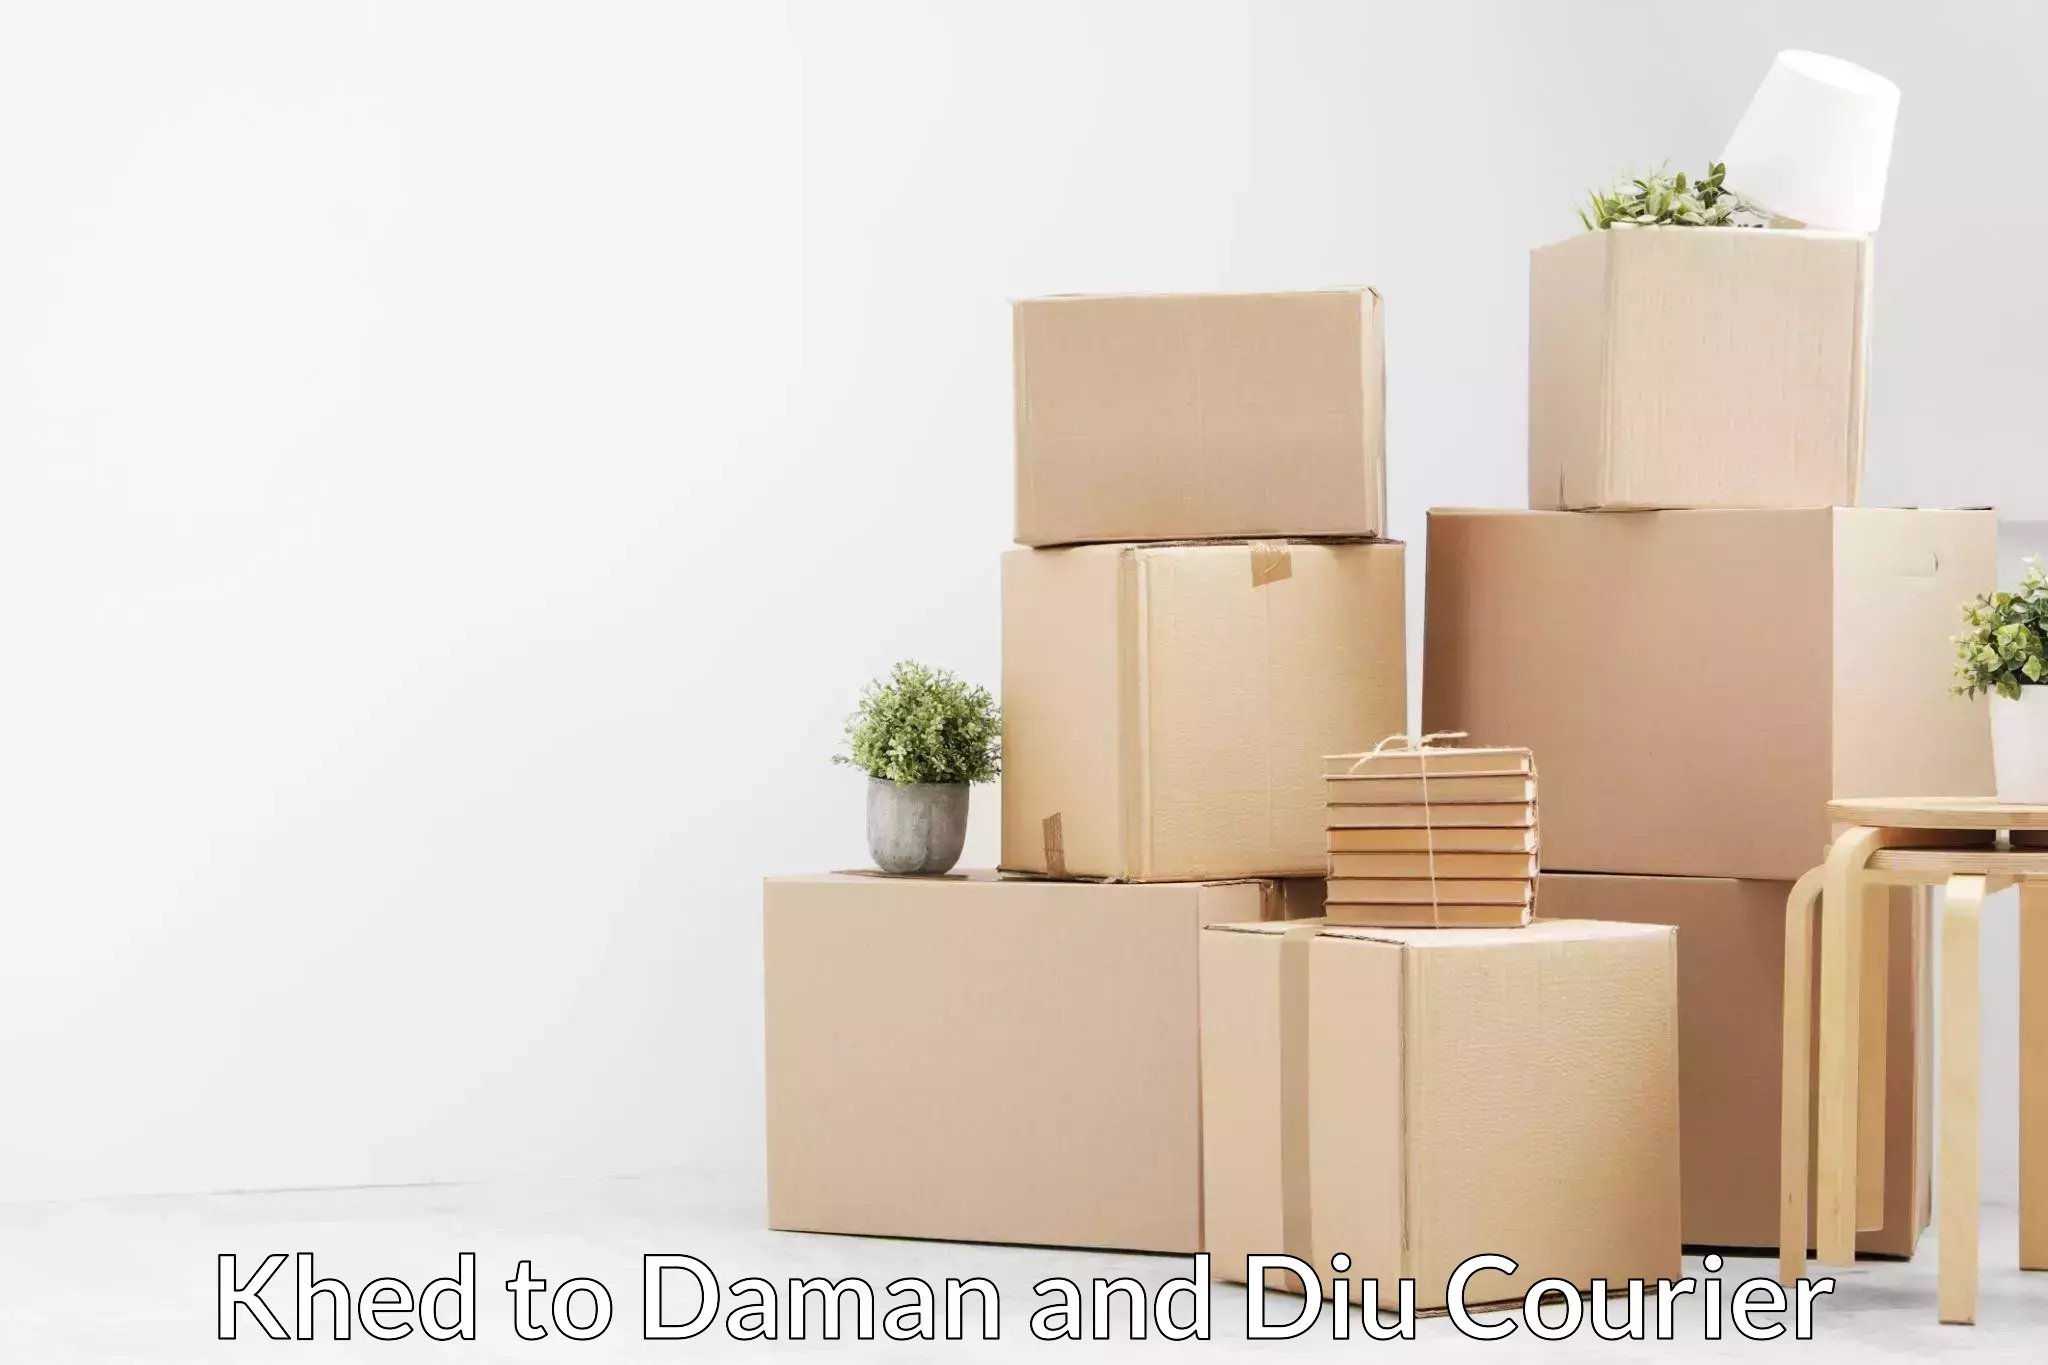 Trusted relocation experts Khed to Daman